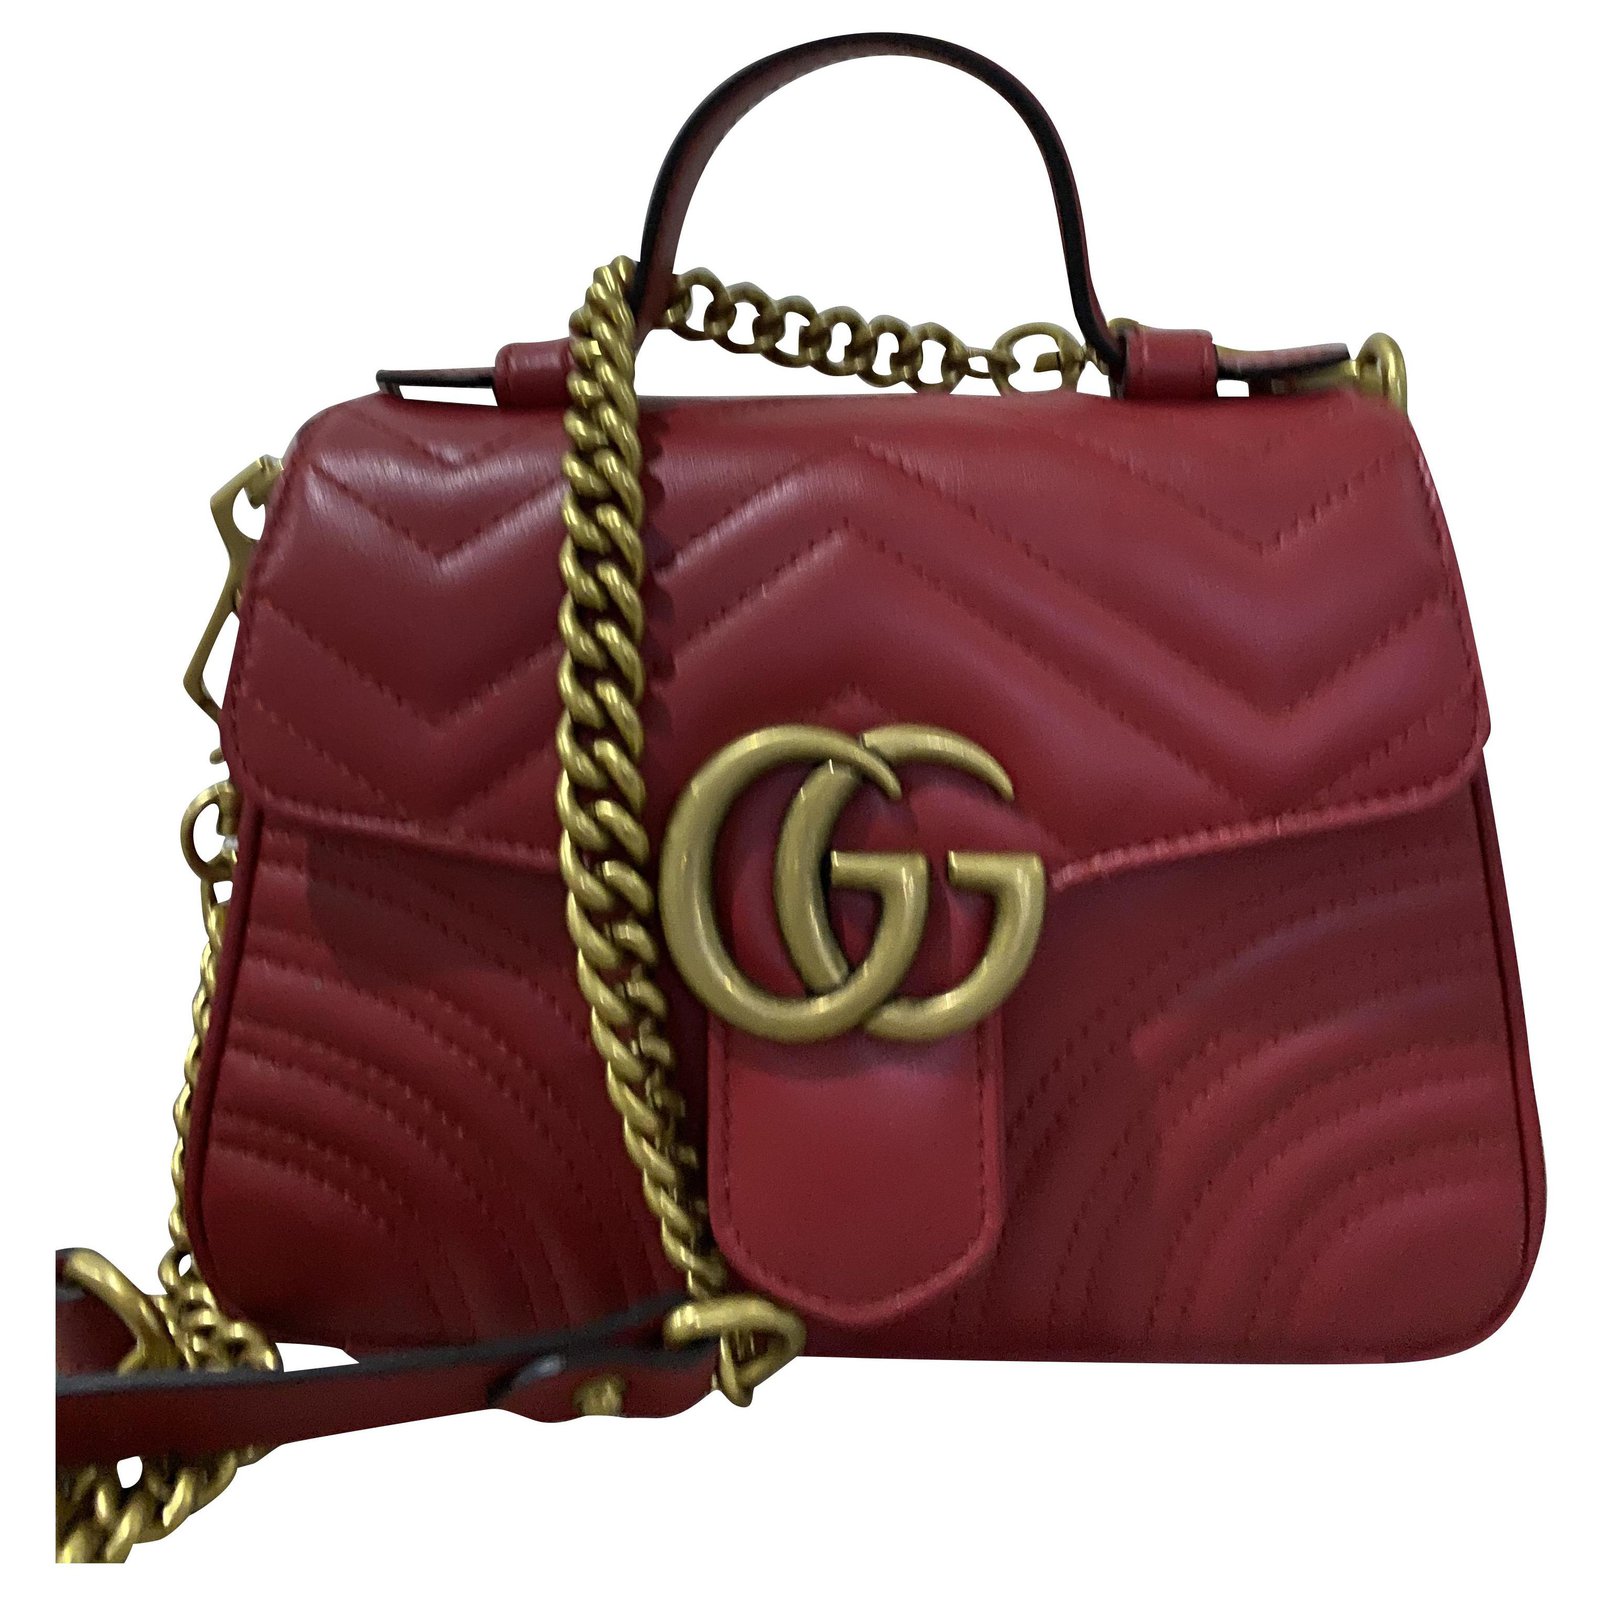 gucci quilted crossbody